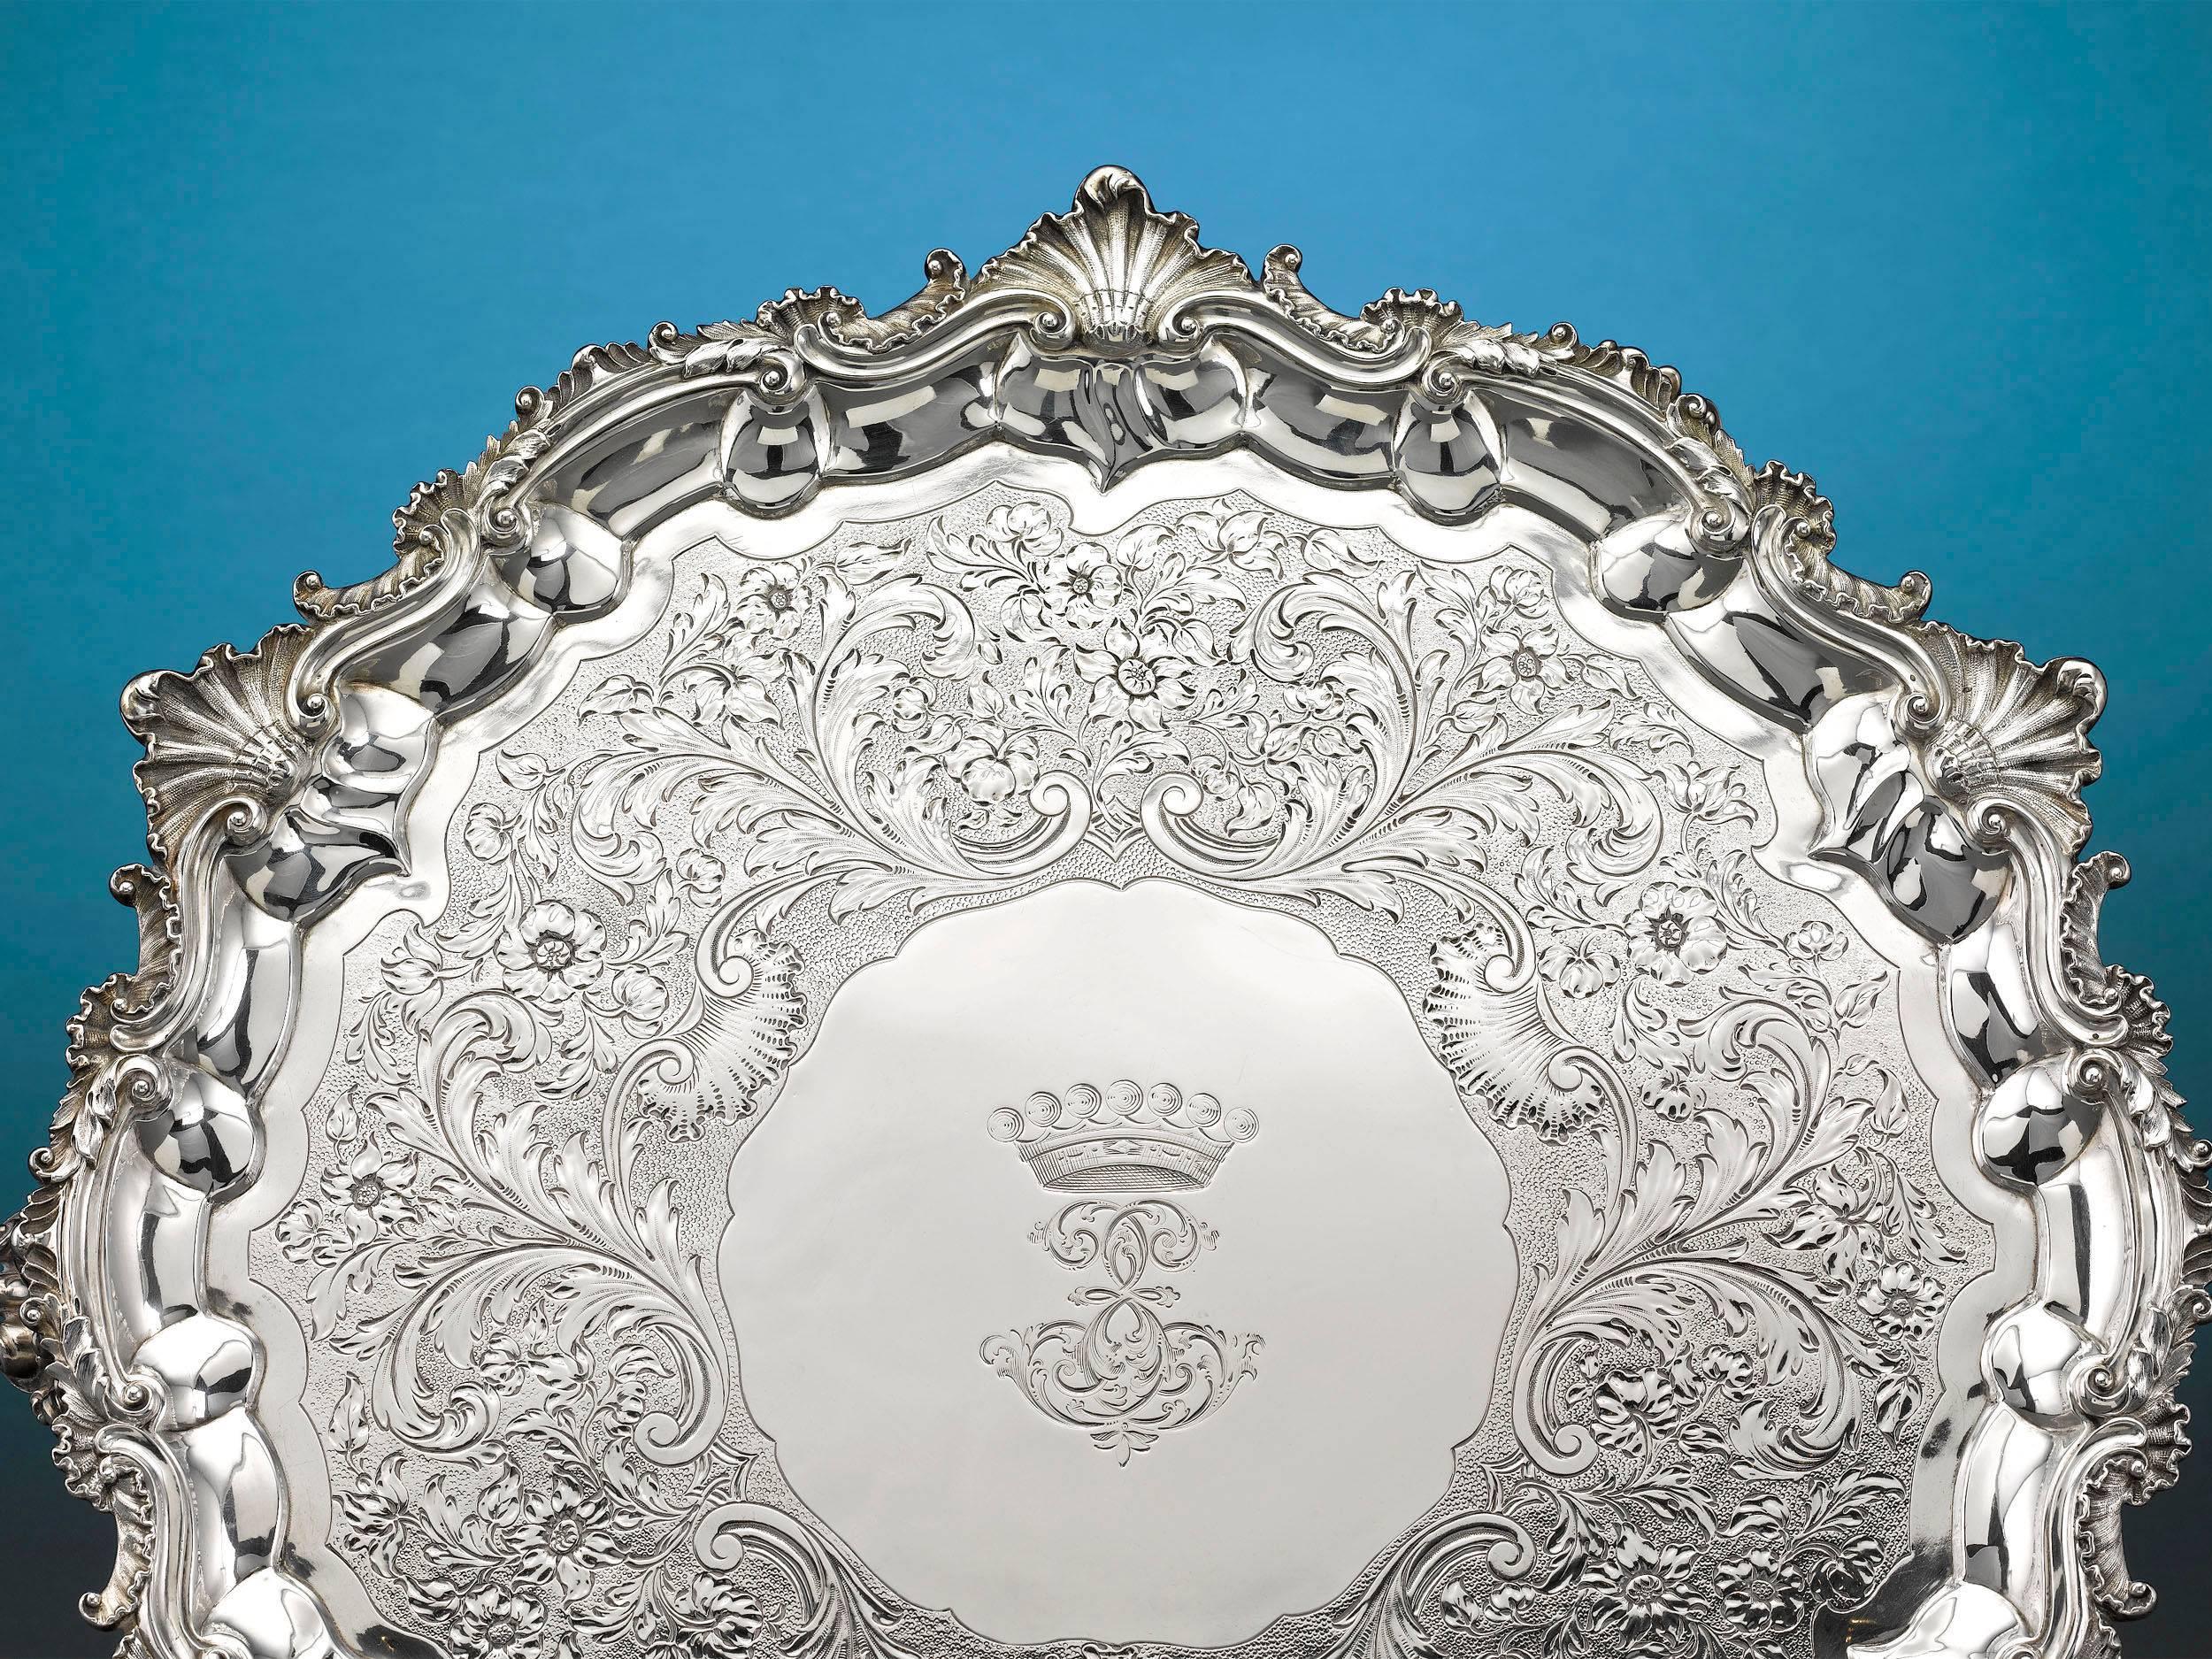 The classical elegance of this stunning Regency period silver tray is the signature of renowned silversmith Paul Storr. Adorned with a striking engraved border with a shell motif, this large William IV silver serving tray is also adorned with an